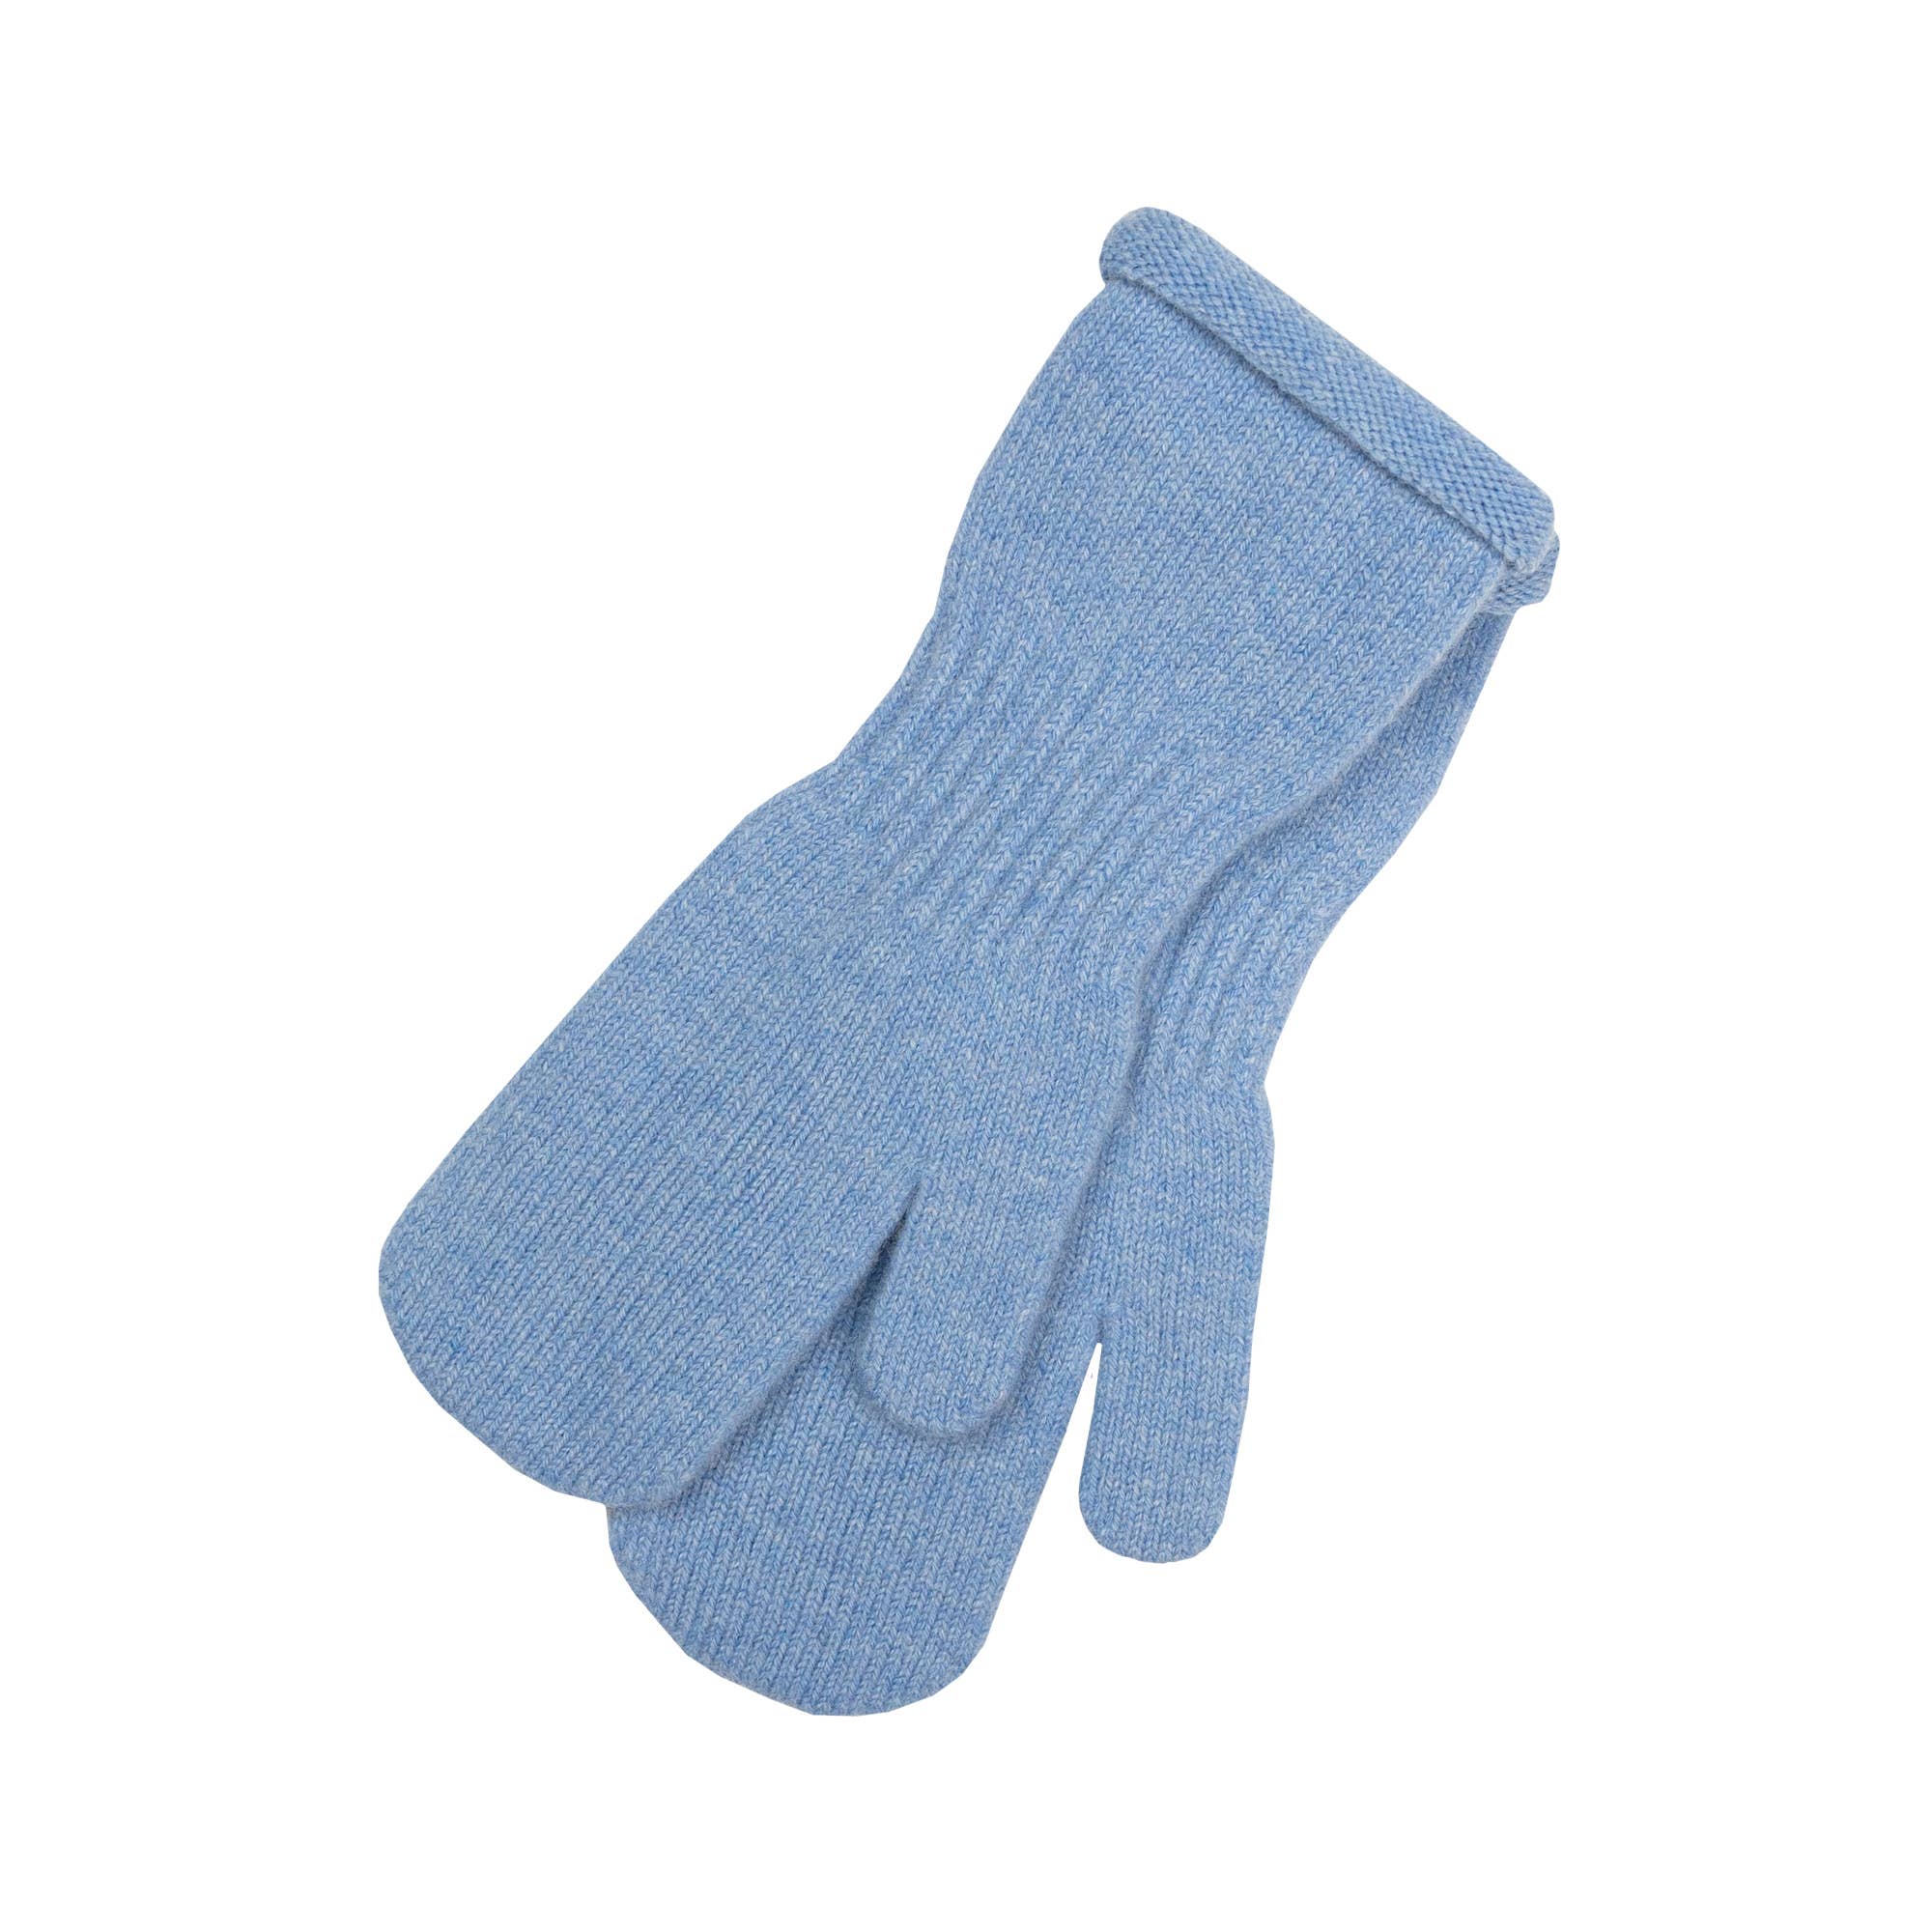 menique - Kids' Mittens Knitted Merino & Cashmere: 1-3 years / Light blue